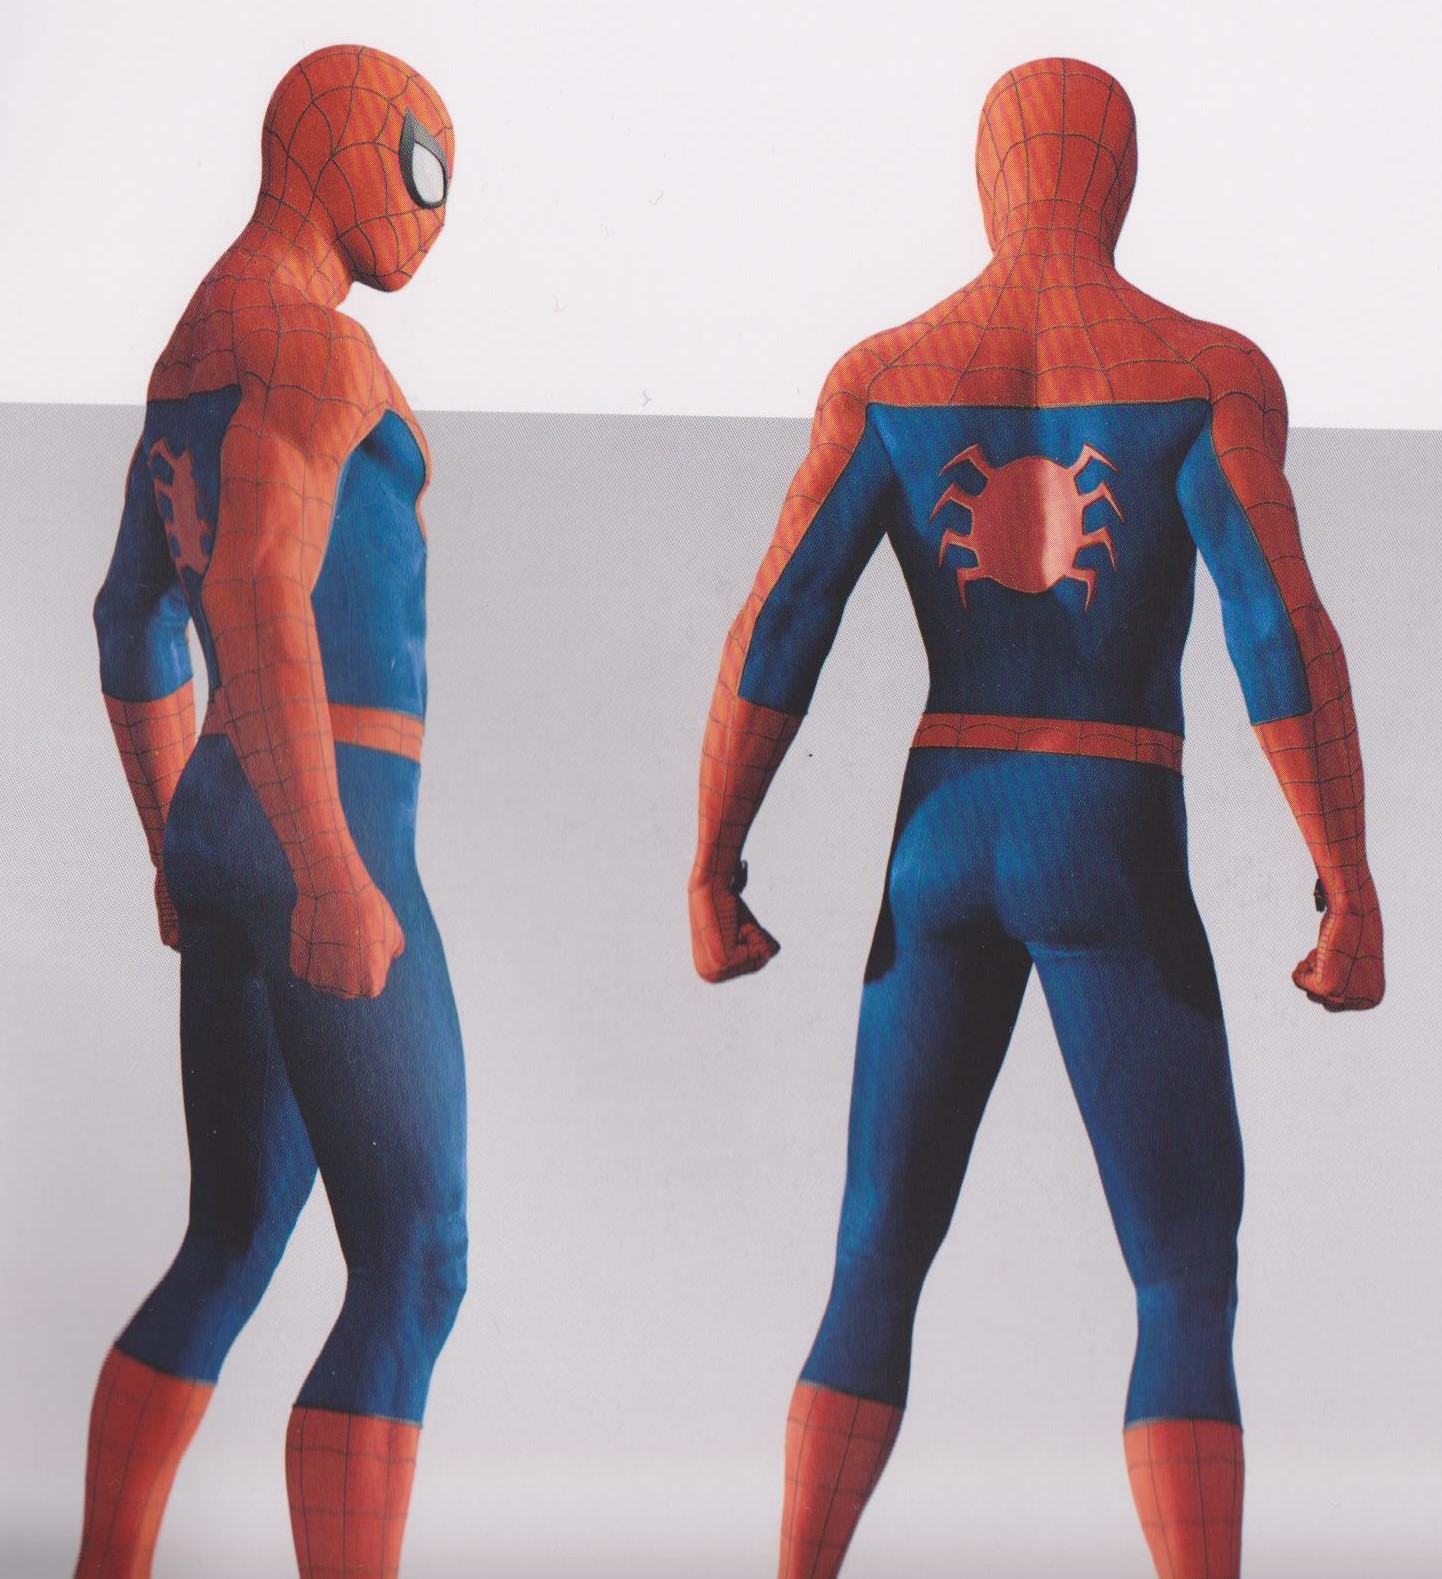 Newly Surfaced SPIDER-MAN Concept Art Shows Off Some Alternate Designs